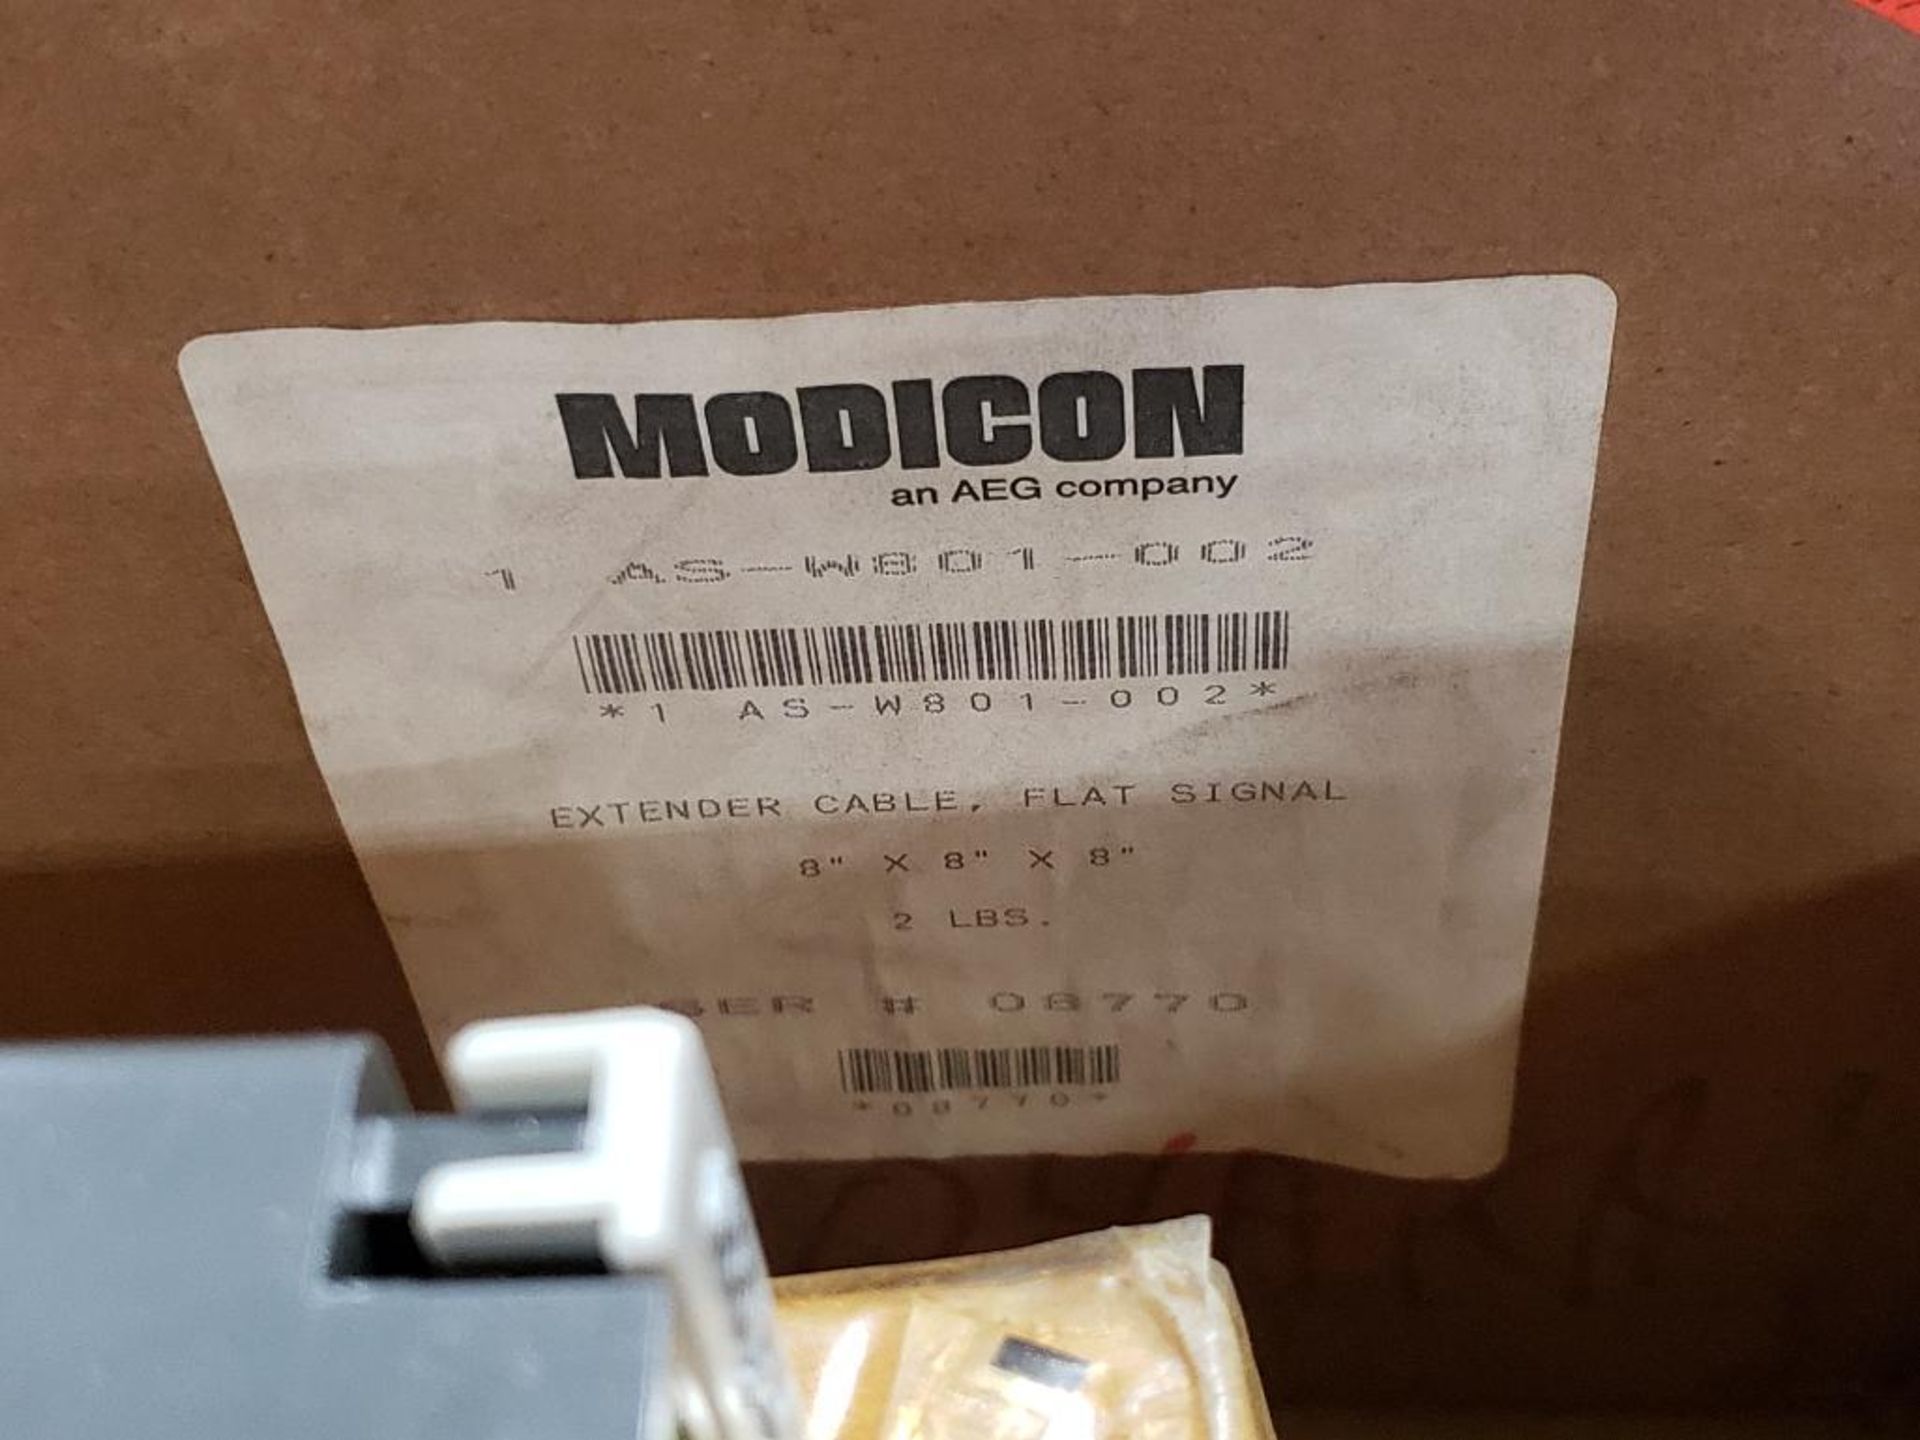 AEG Modicon AS-W801-002 Flat signal extender cable. 8" x 8" x 8". - Image 3 of 3